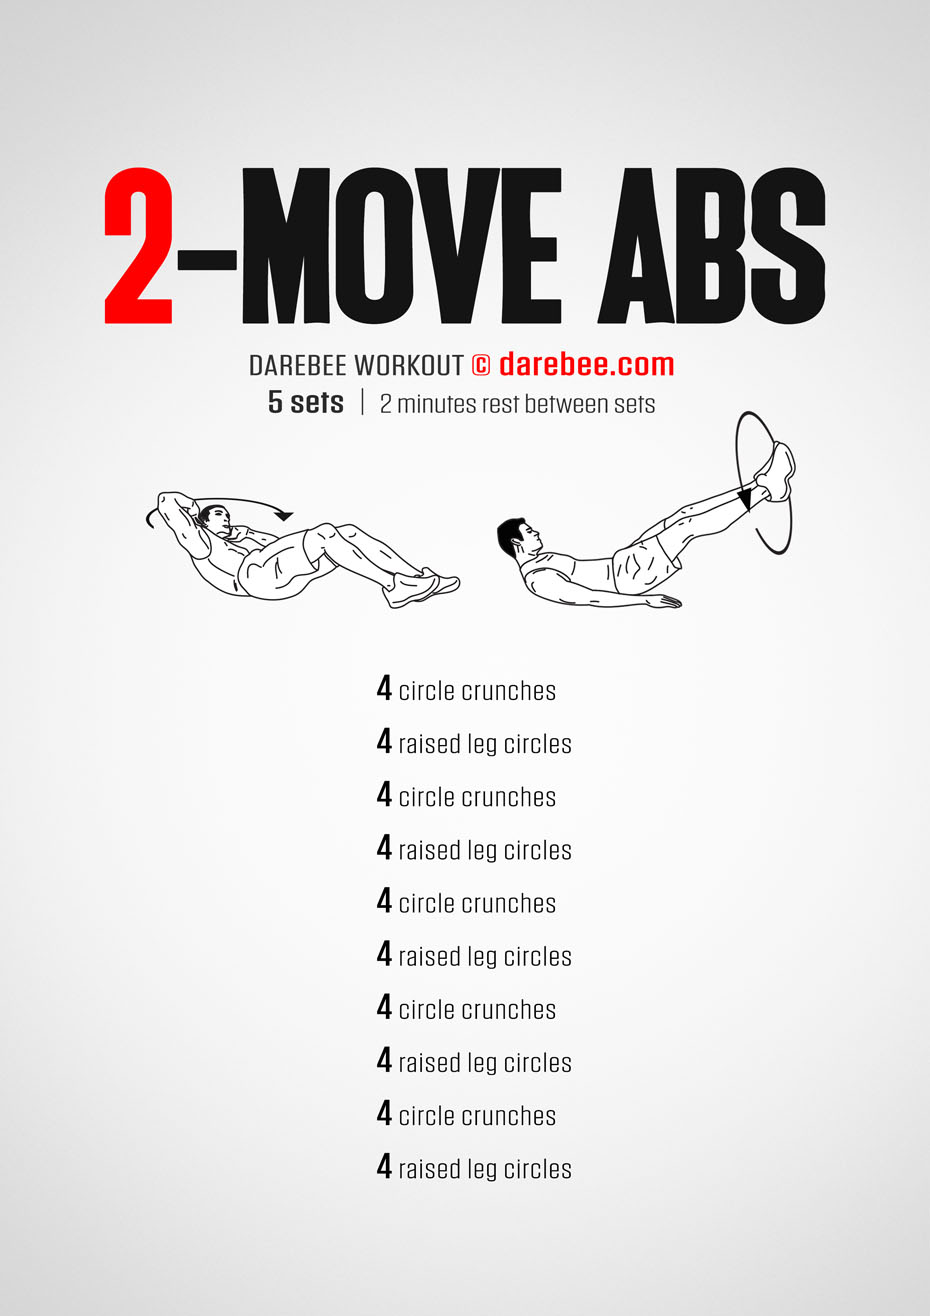 2-Move Abs is a Darebee home-fitness workout you can do anywhere that will transform the way your abs work and look and the way you move your body.